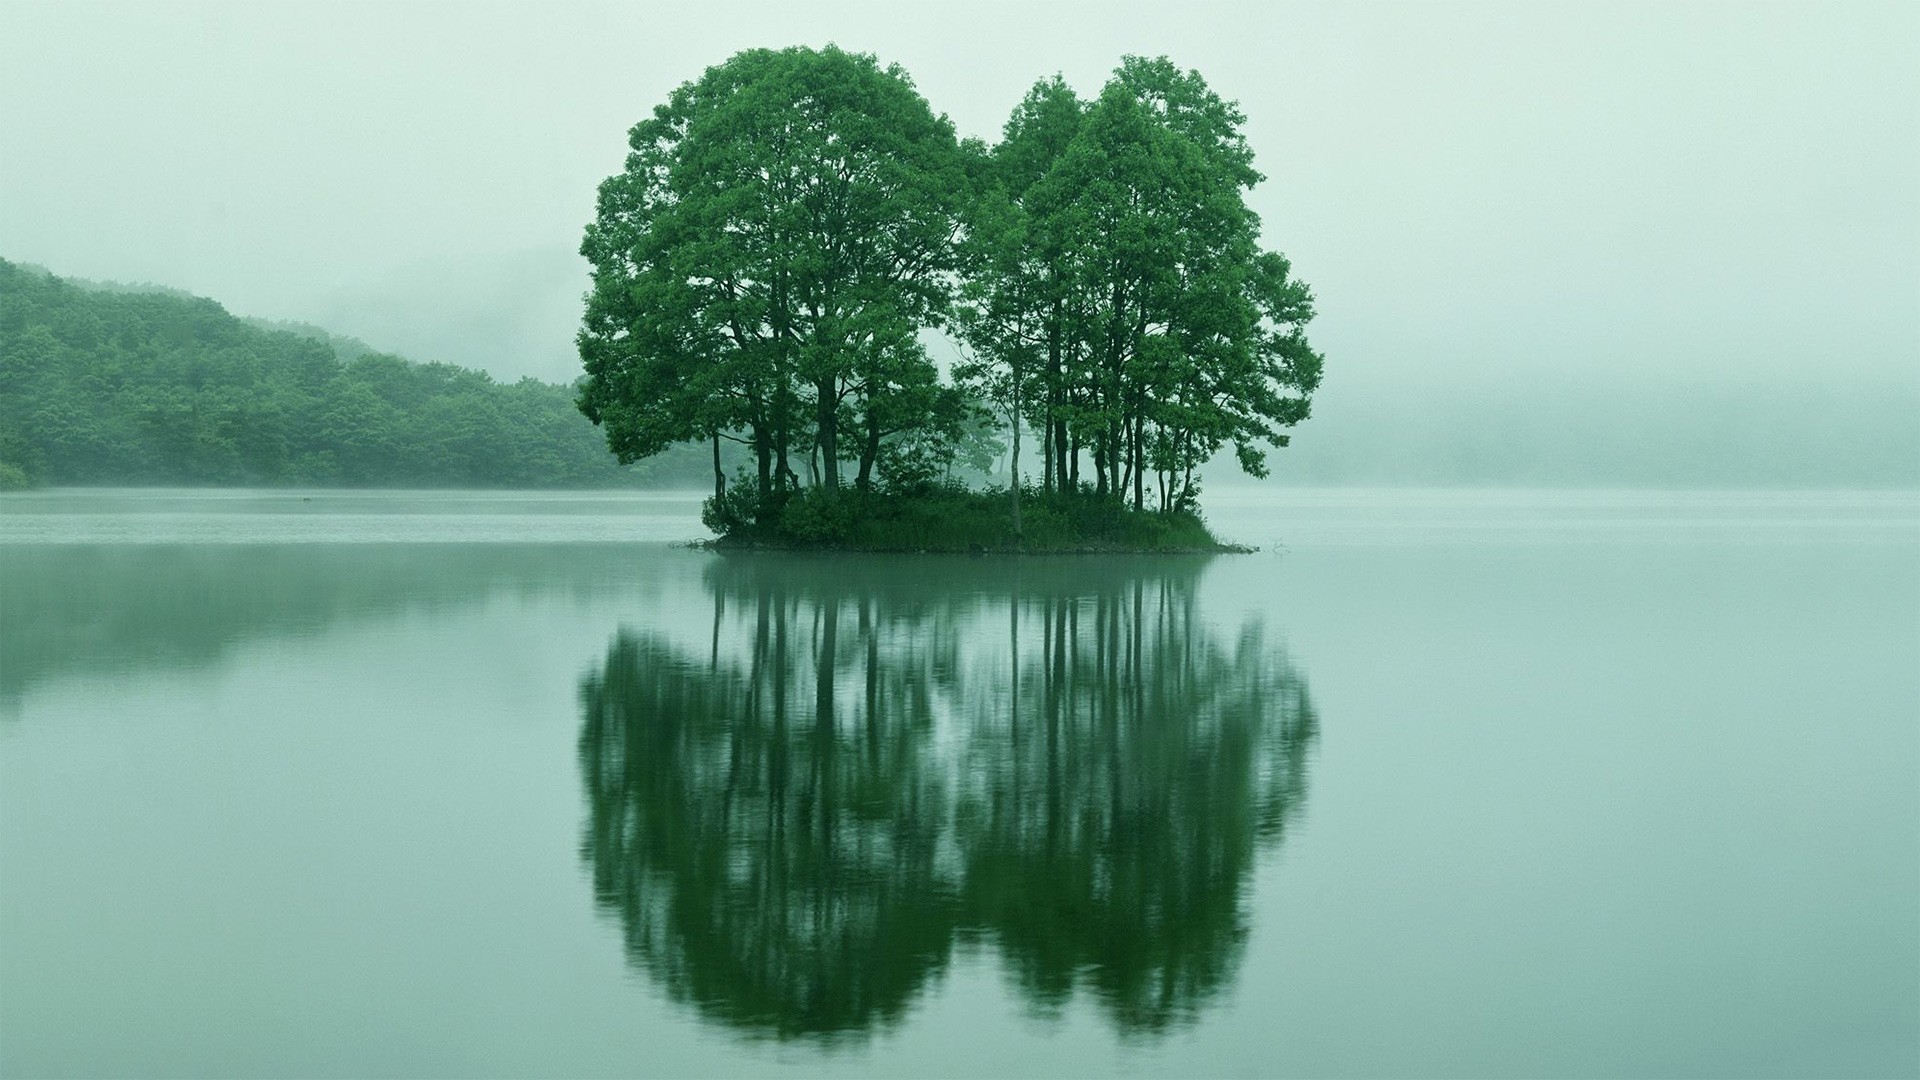 General 1920x1080 lake trees island green mist nature reflection calm waters water